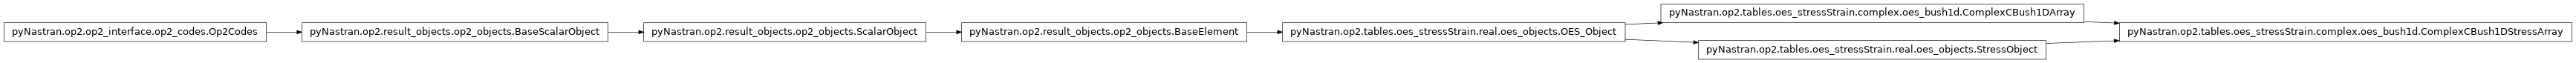 Inheritance diagram of pyNastran.op2.tables.oes_stressStrain.complex.oes_bush1d